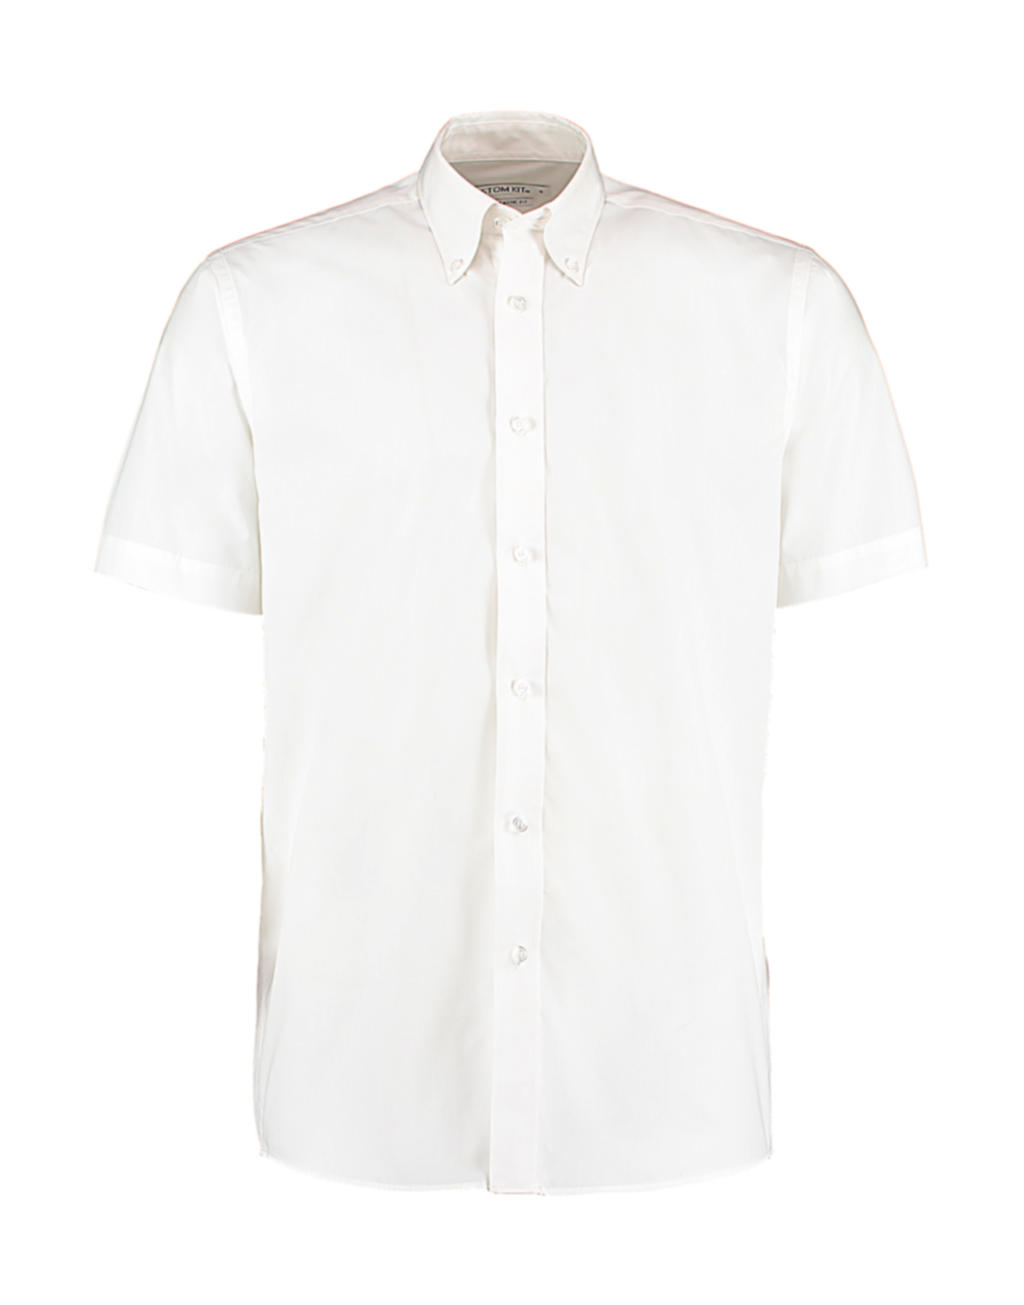 Classic Fit Workforce Shirt